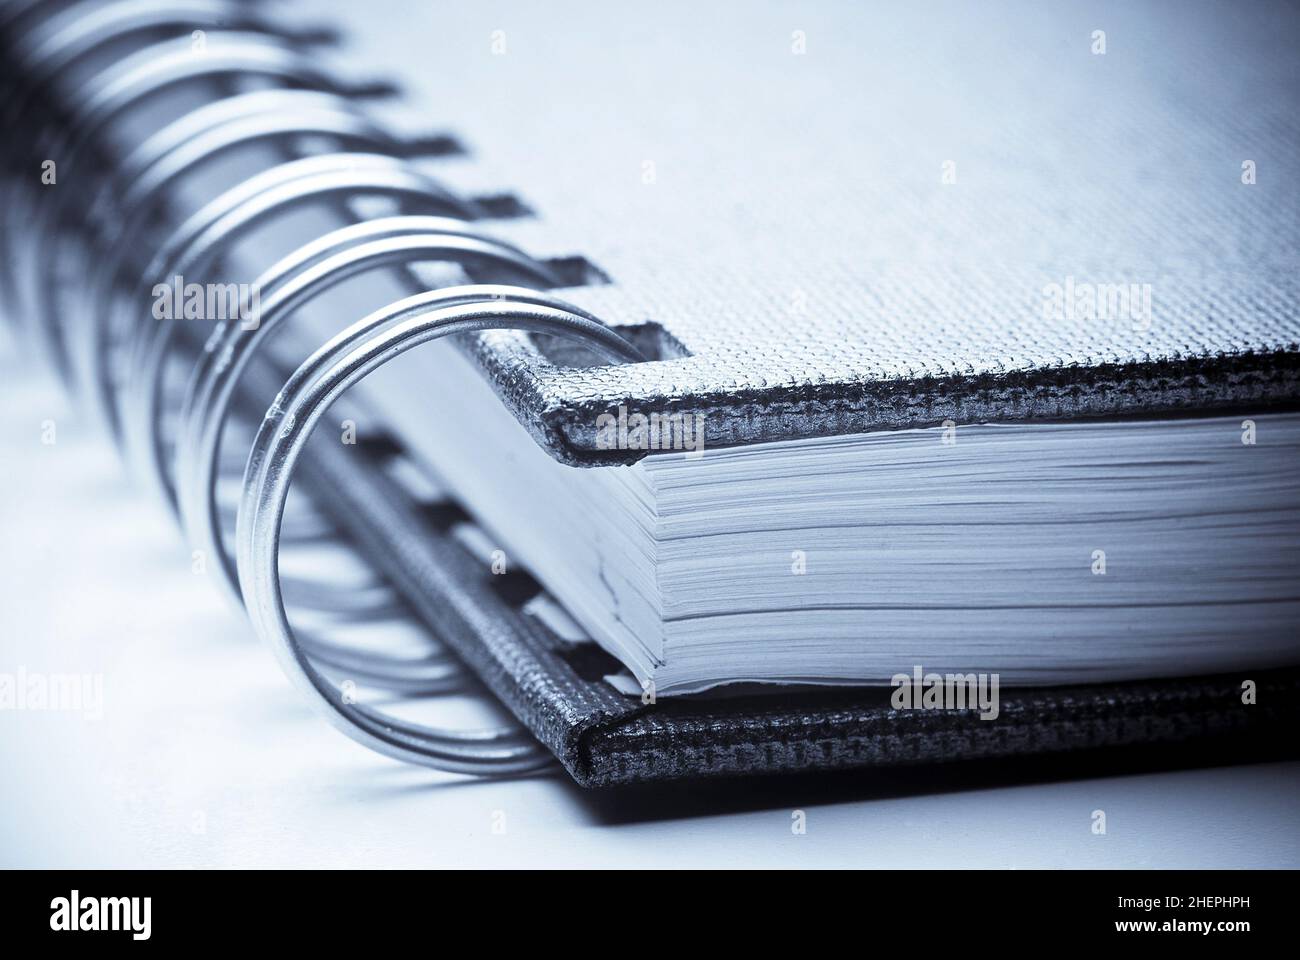 note-book with spiral binding, detail Stock Photo